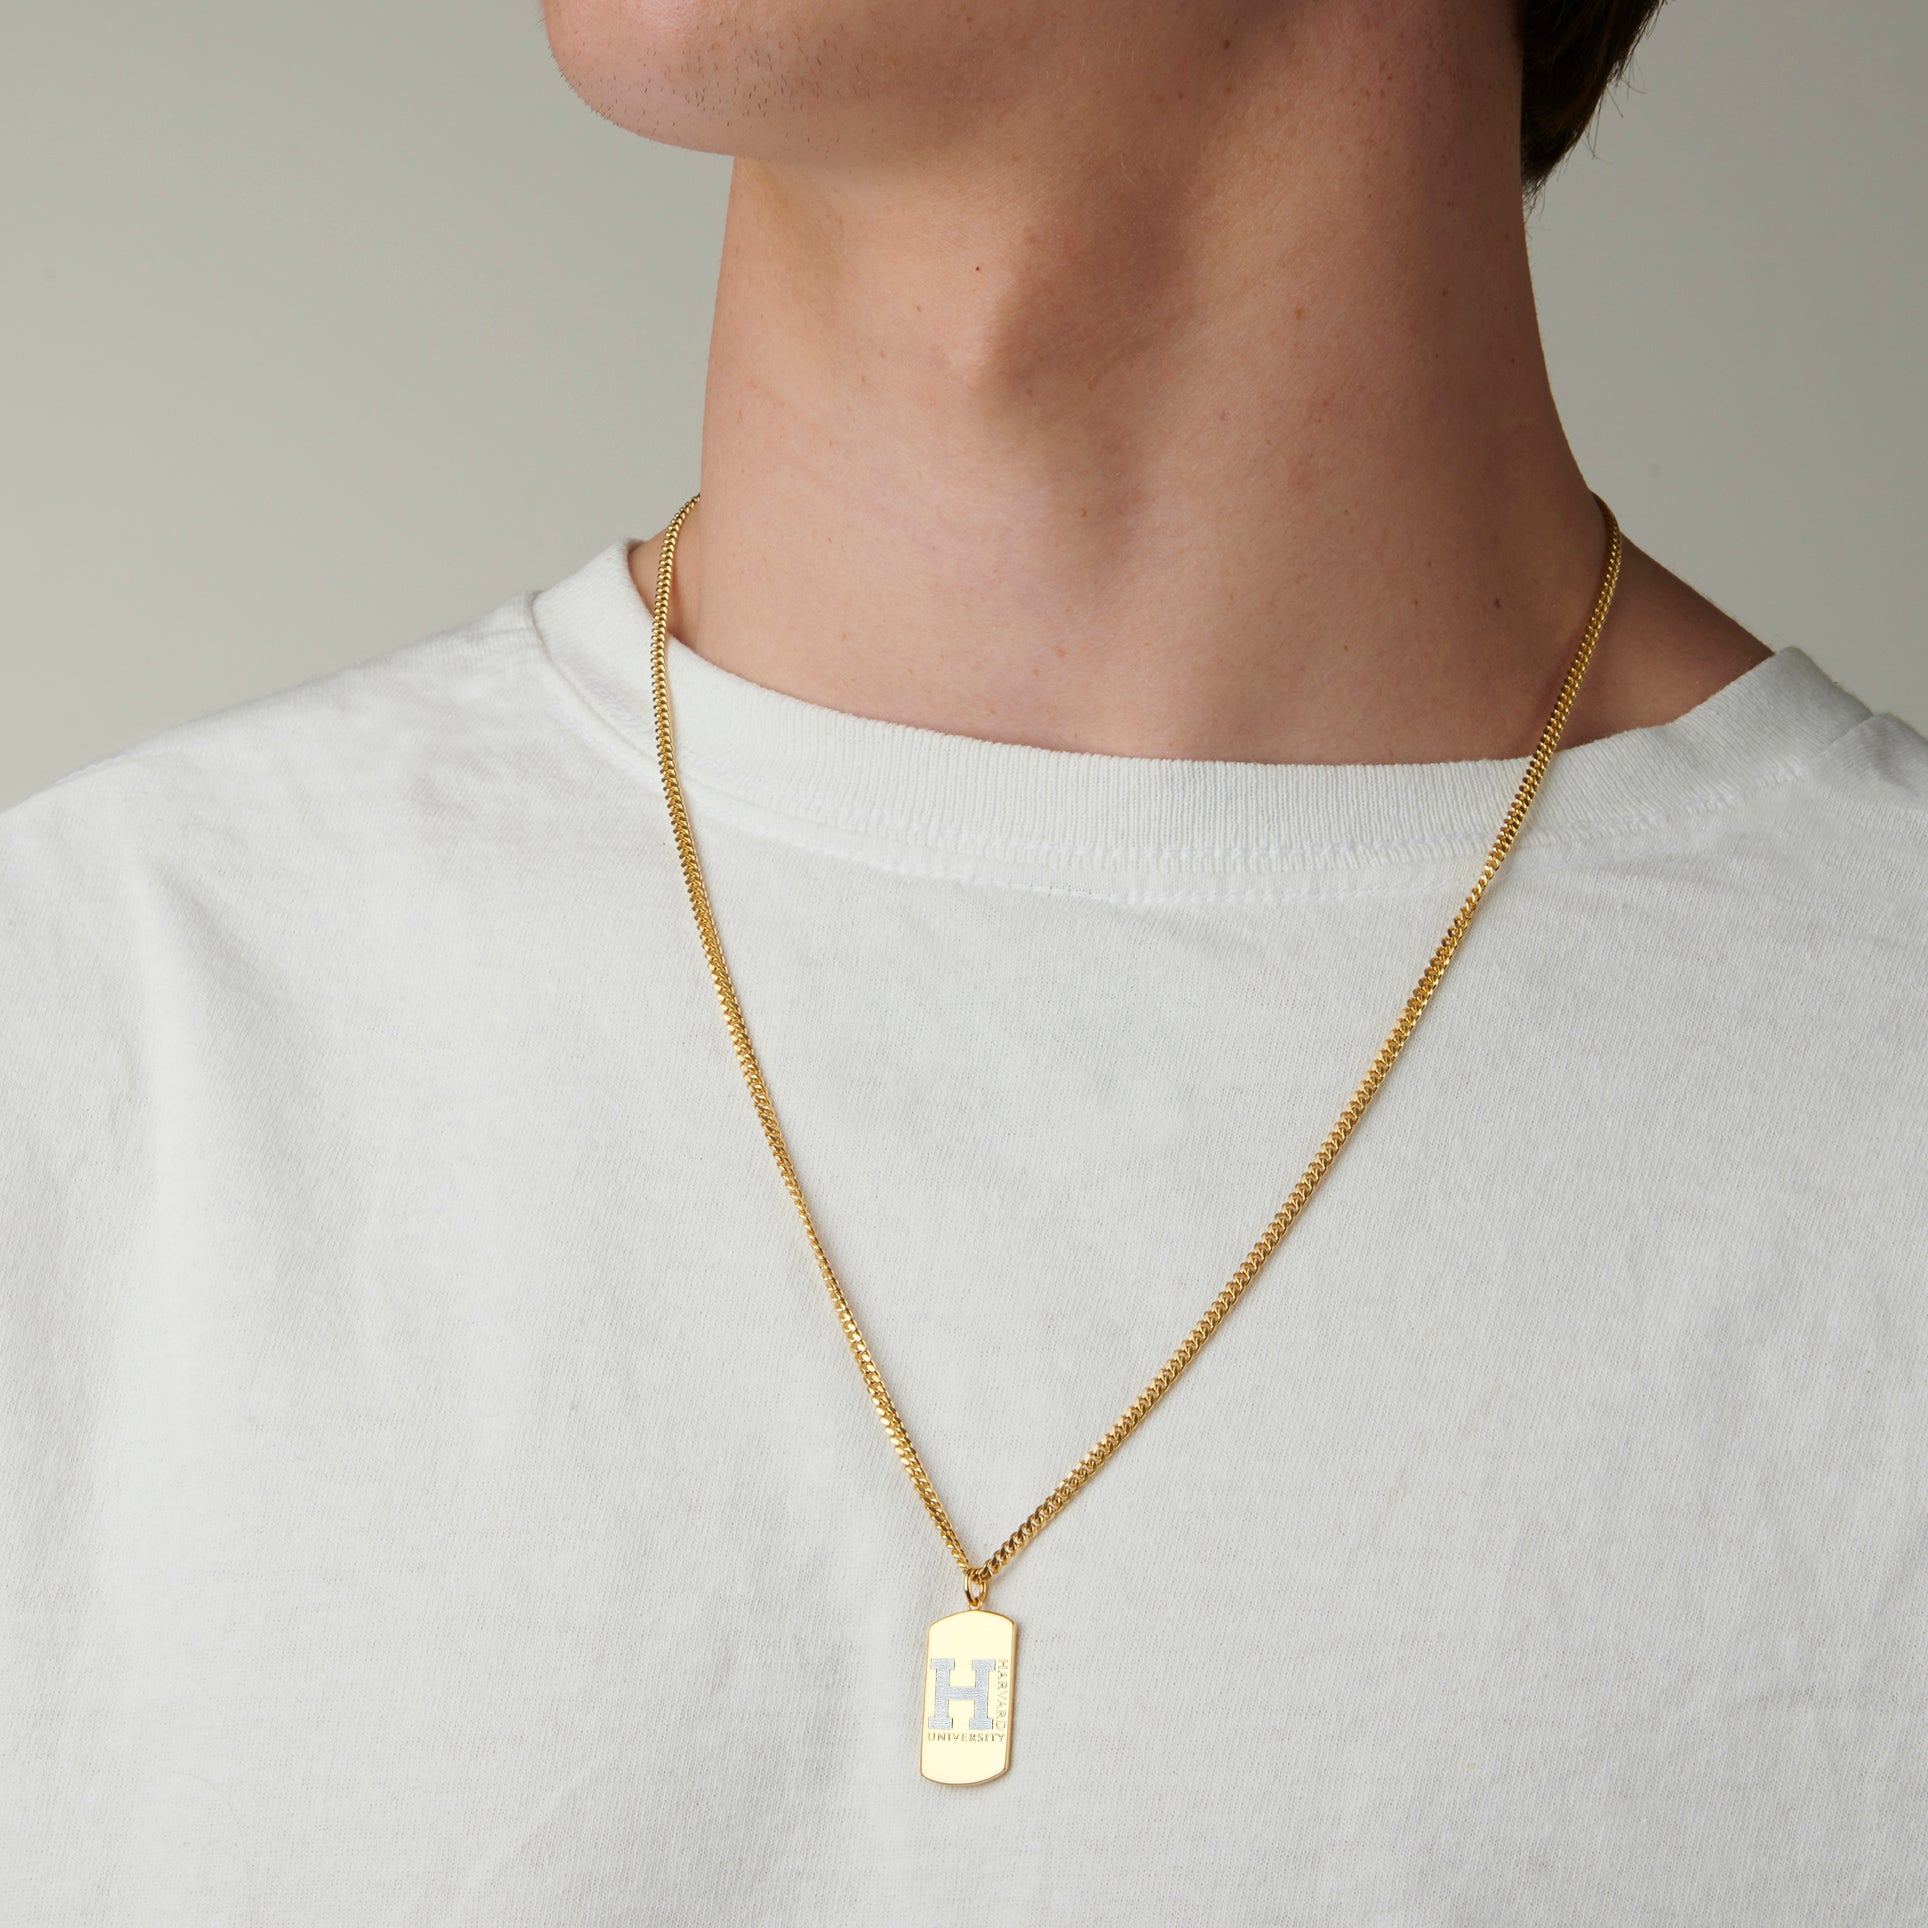 Man wearing Harvard Squadra Pendant in Gold Vermeil: A stylish depiction of a man proudly wearing the Harvard Squadra Pendant in gold vermeil, showcasing his connection to Harvard University.